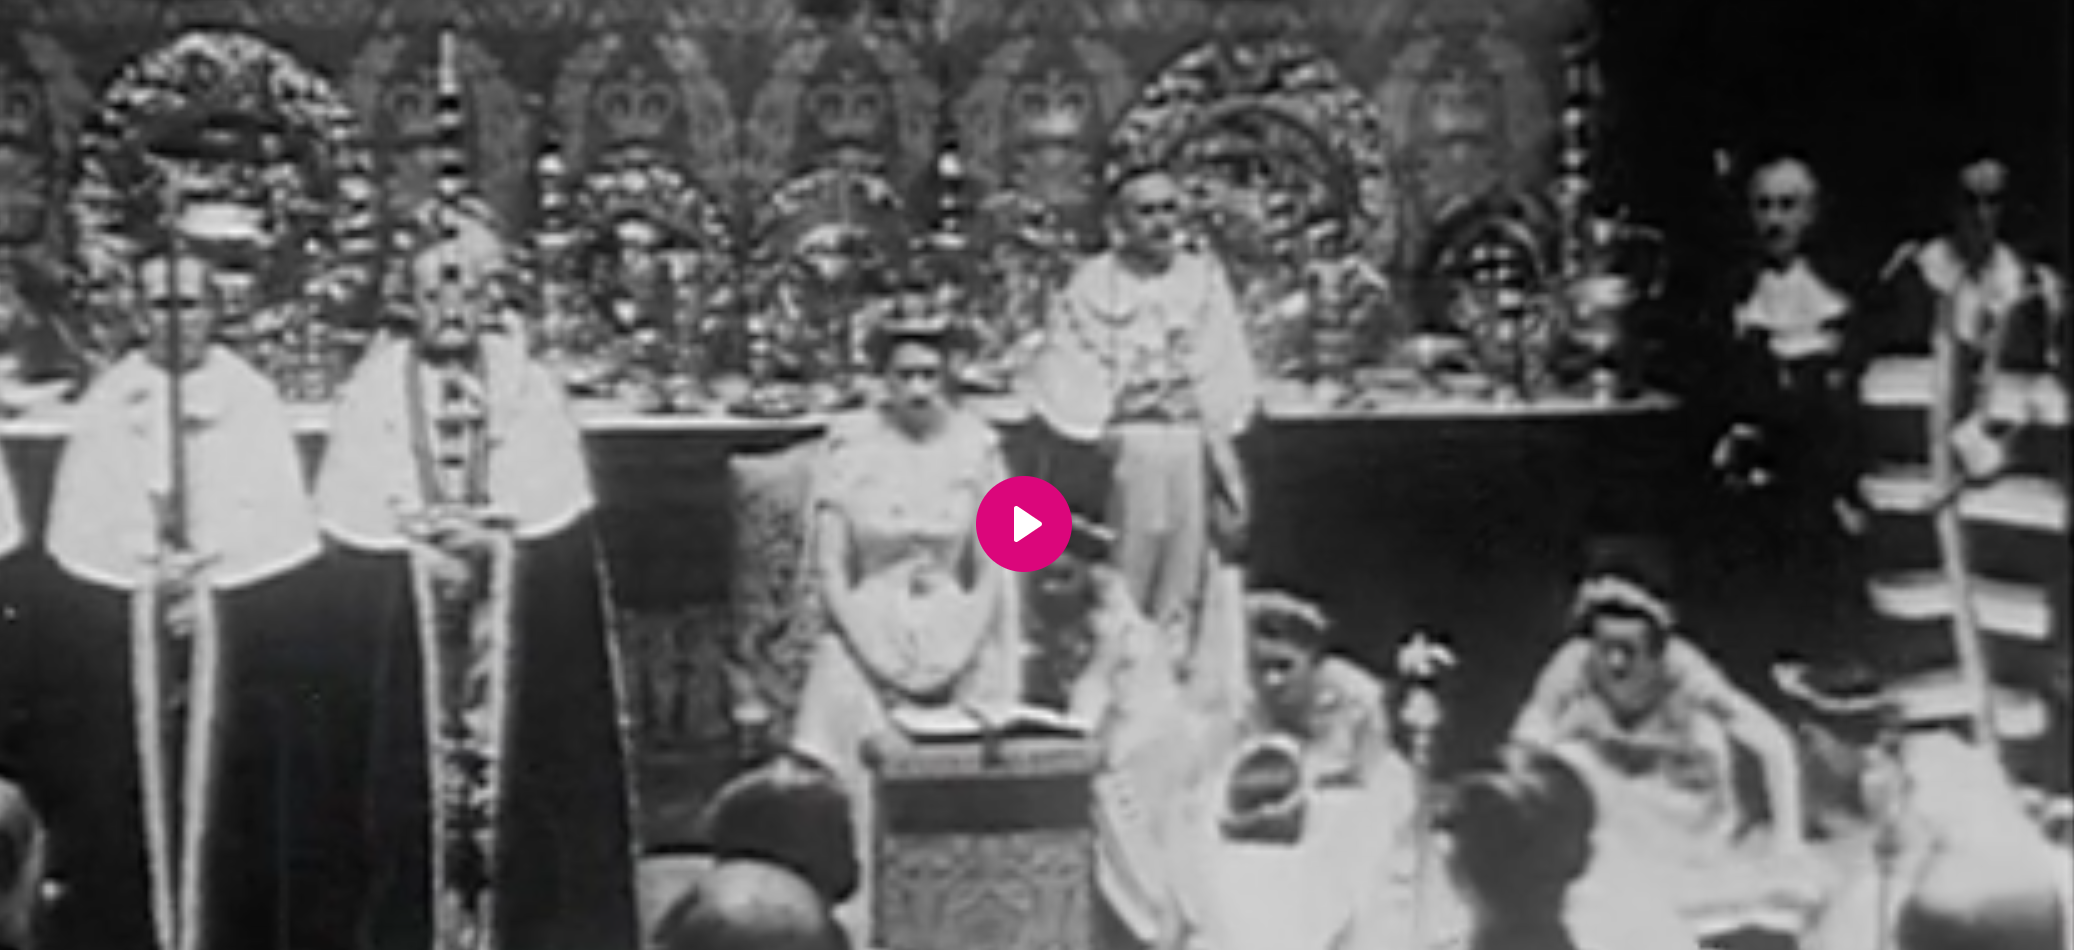 Black and White footage of the Coronation of Queen Elizabeth II on 2 June 1953 at Westminster Abbey, London